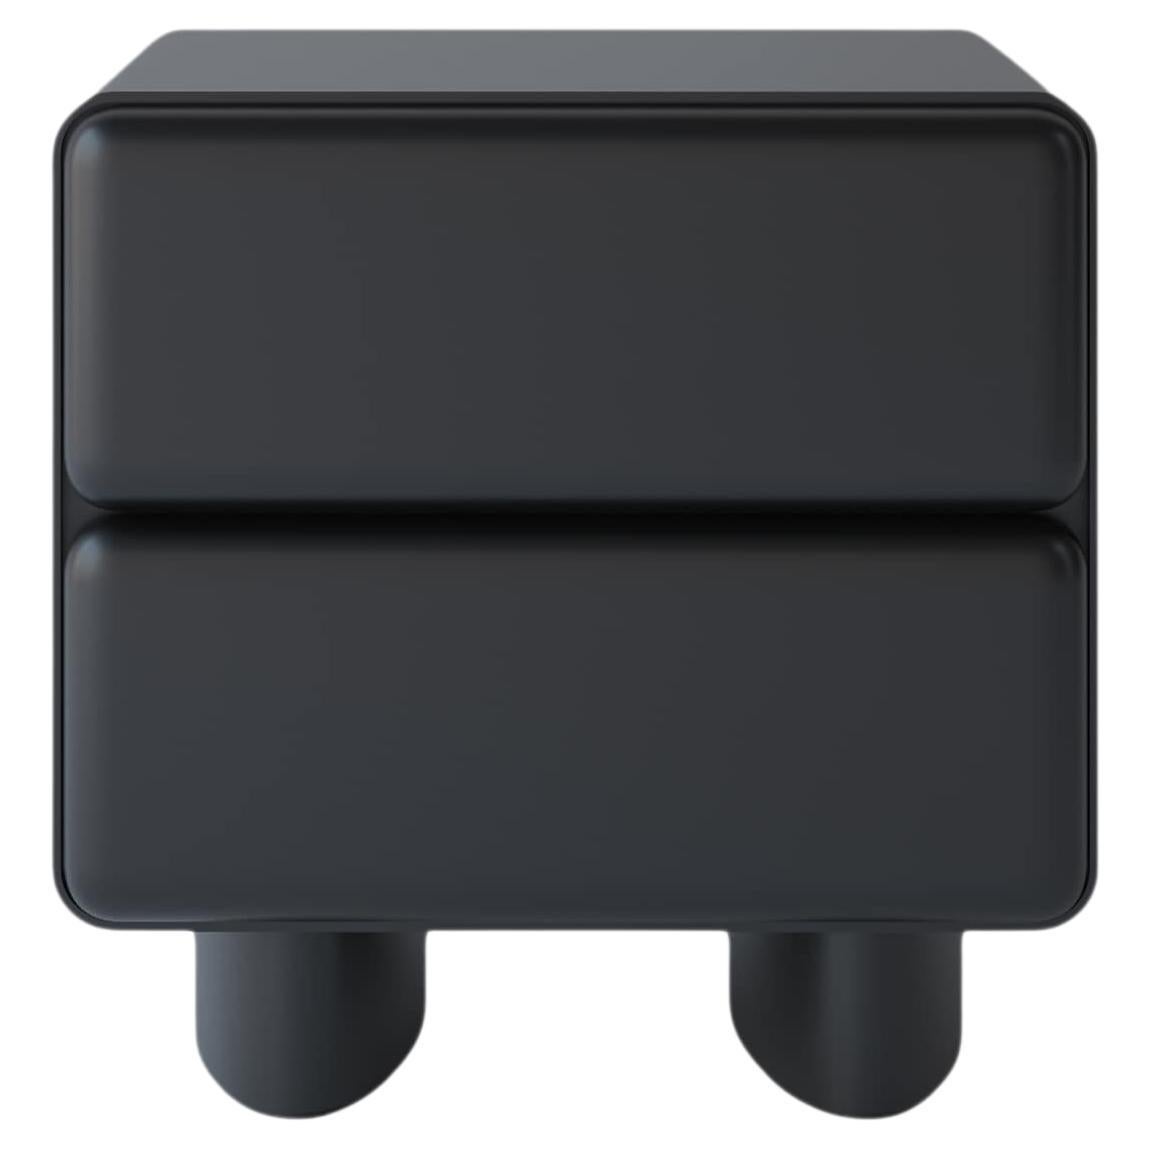 Tombul 2-Drawer Nightstand with Push-to-Open Mechanism, Black Colour